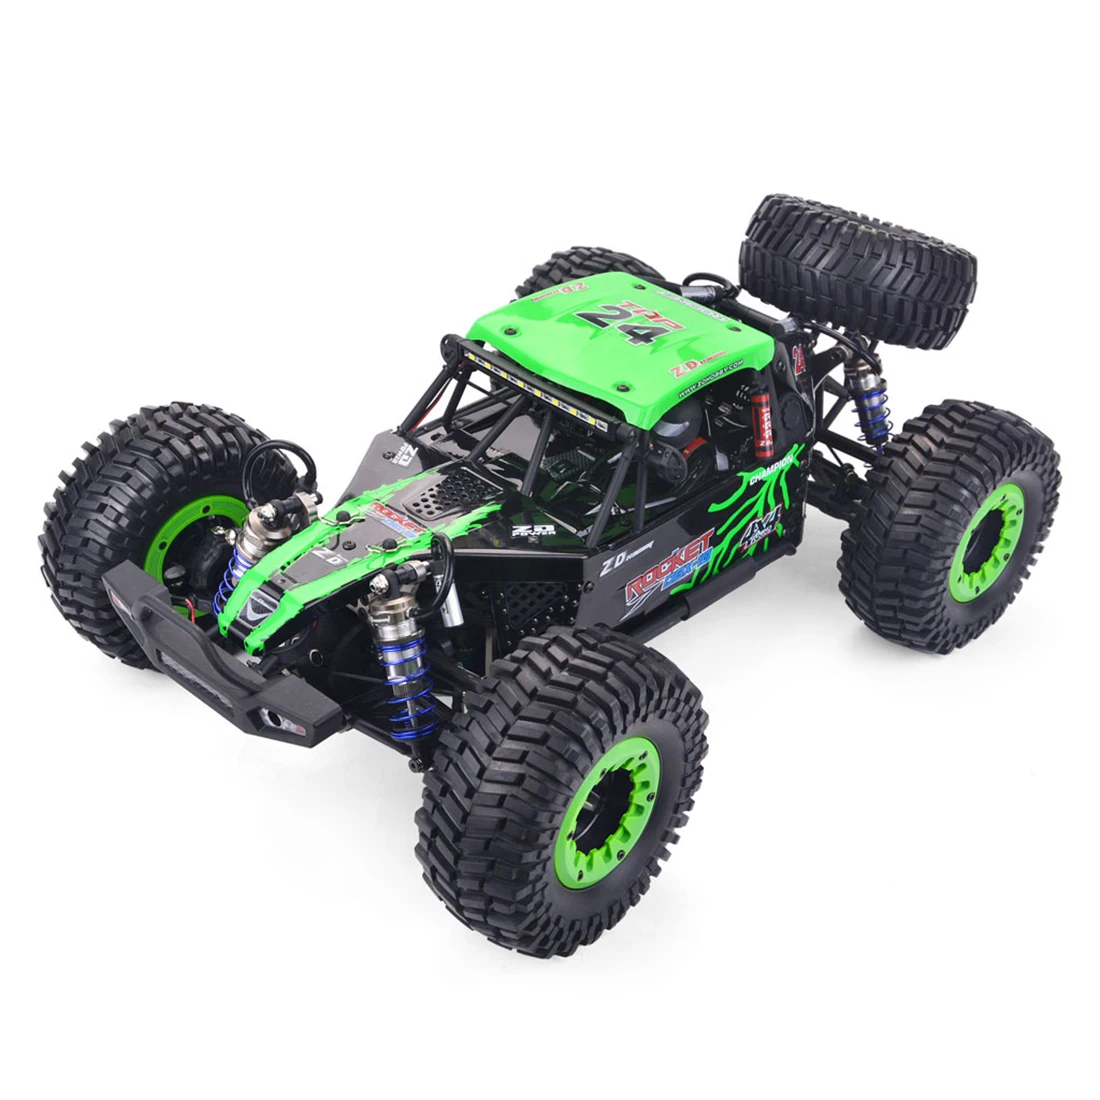 

ZD Racing ROCKET DBX-10 1/10 4WD 80km/H 2.4G Brushless Motor High-speed RC Car Desert Off-road Vehicle - RTR Version+Spare Tire